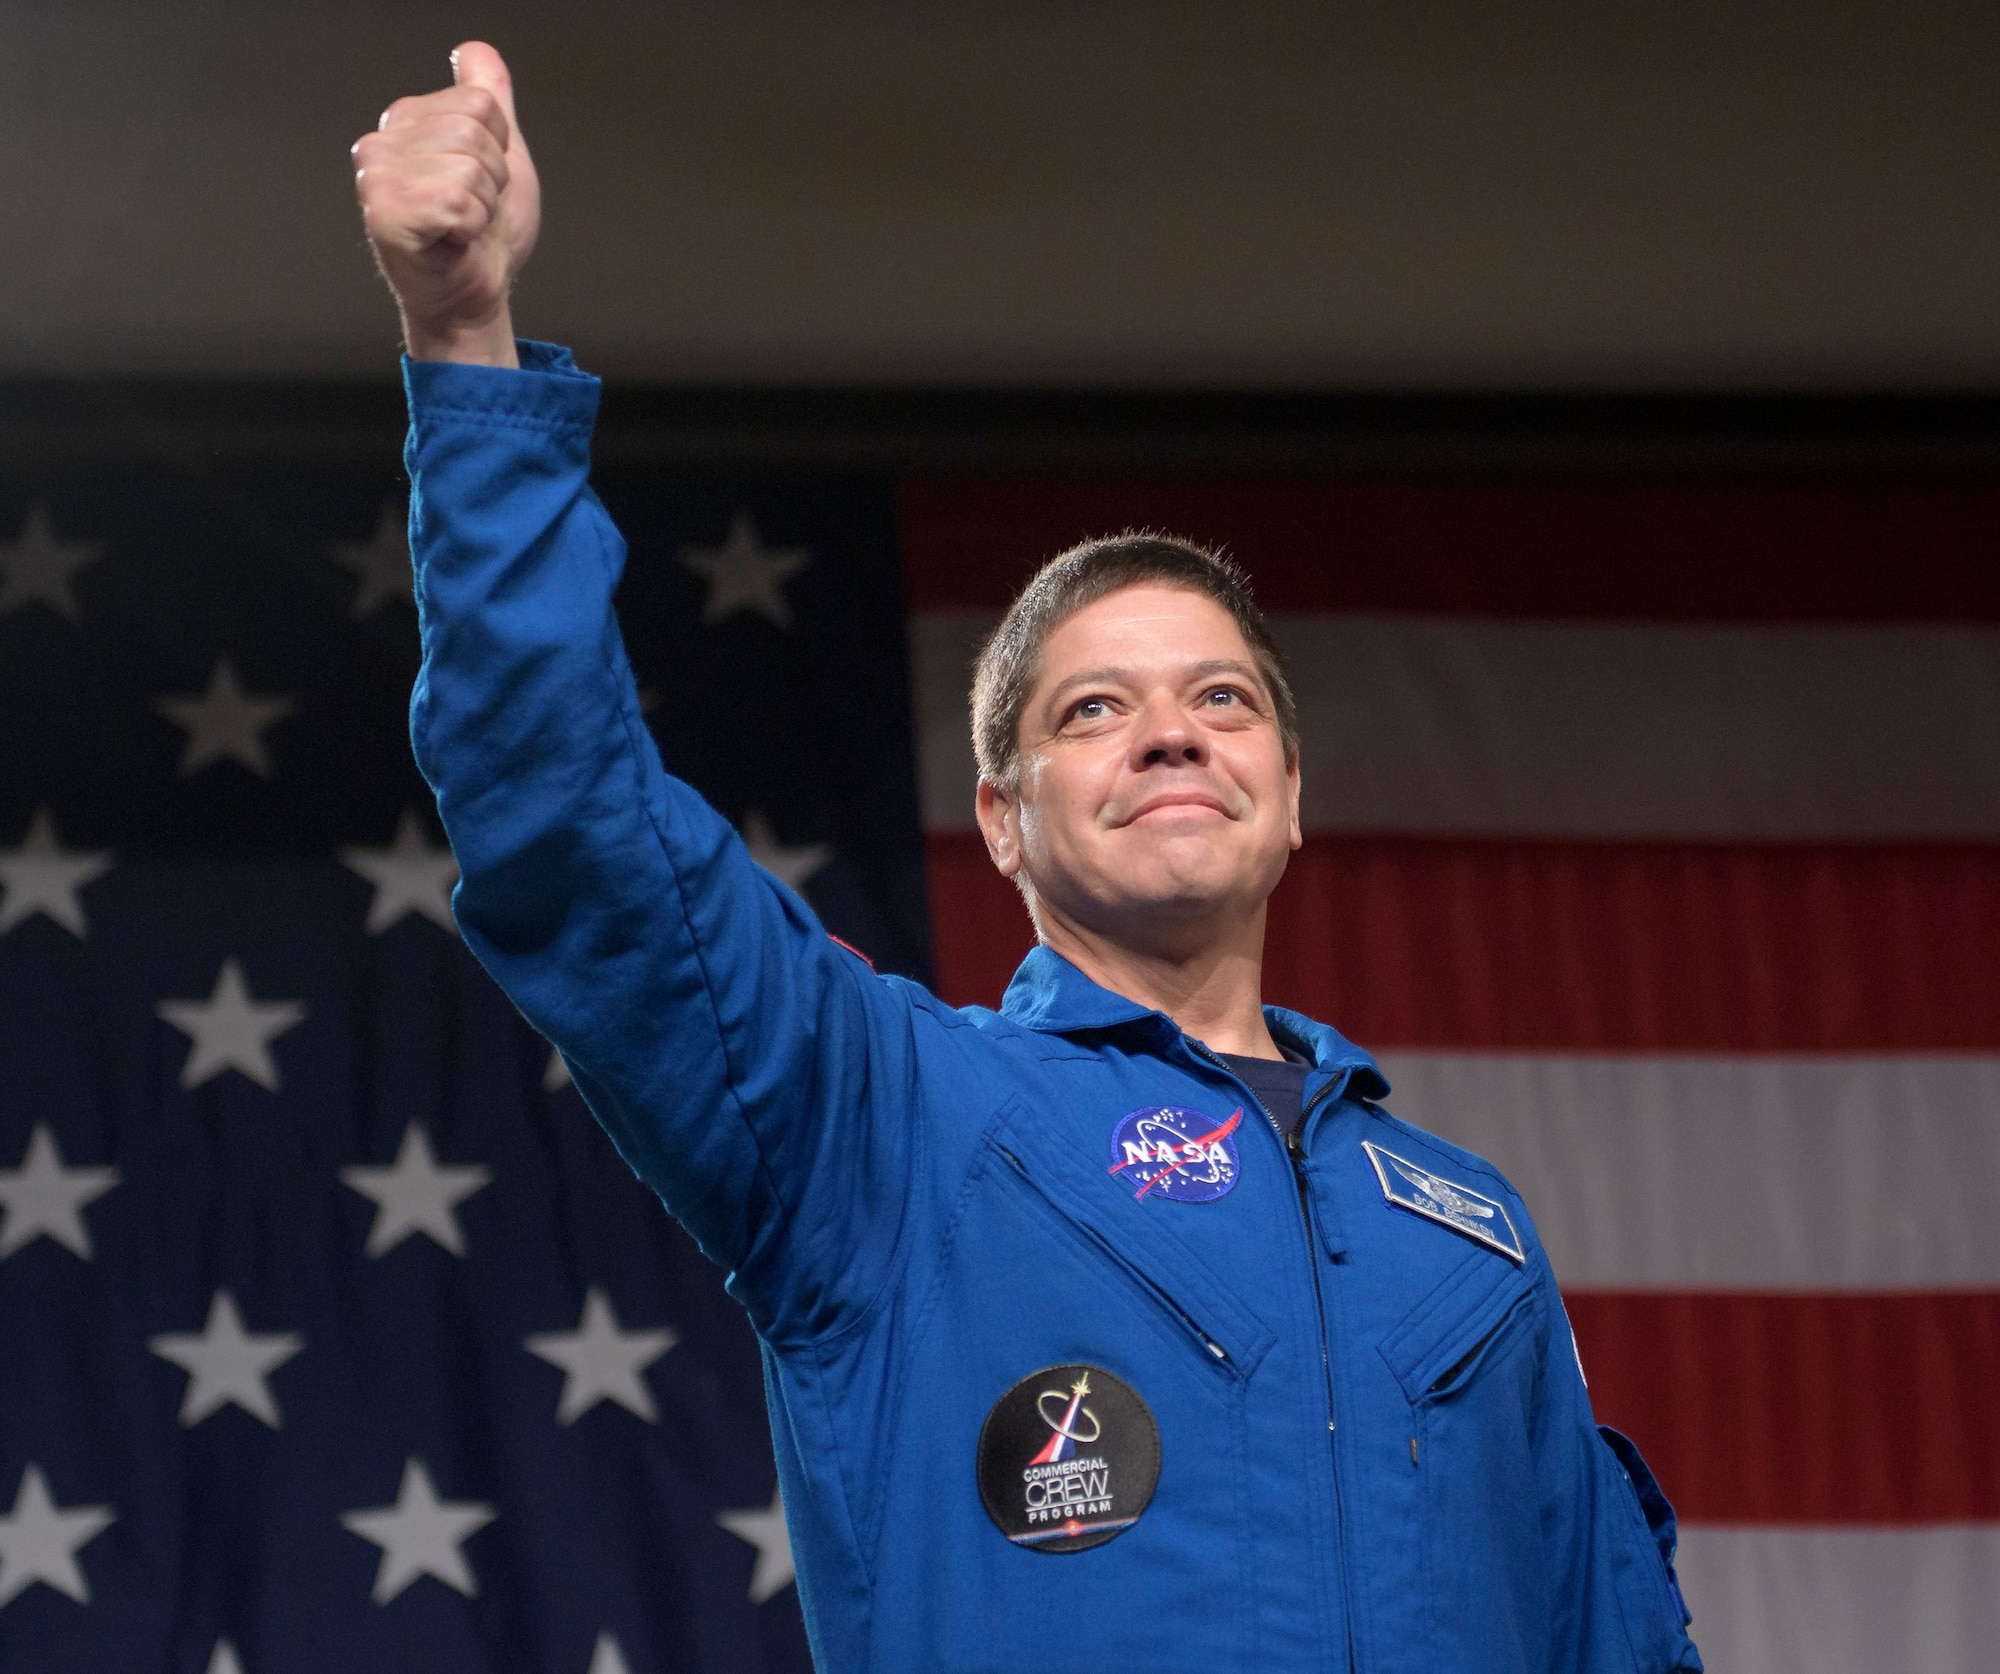 NASA astronaut Bob Behnken is seen during a NASA event where it was announced that he, and NASA astronaut Doug Hurley are assigned to SpaceX’s Crew Dragon Demo-2 flight to the International Space Station, Friday, Aug. 3, 2018 at NASA’s Johnson Space Center in Houston, Texas. Astronauts assigned to crew the first flight tests and missions of the Boeing CST-100 Starliner and SpaceX Crew Dragon were announced during the event. Photo Credit: (NASA/Bill Ingalls)